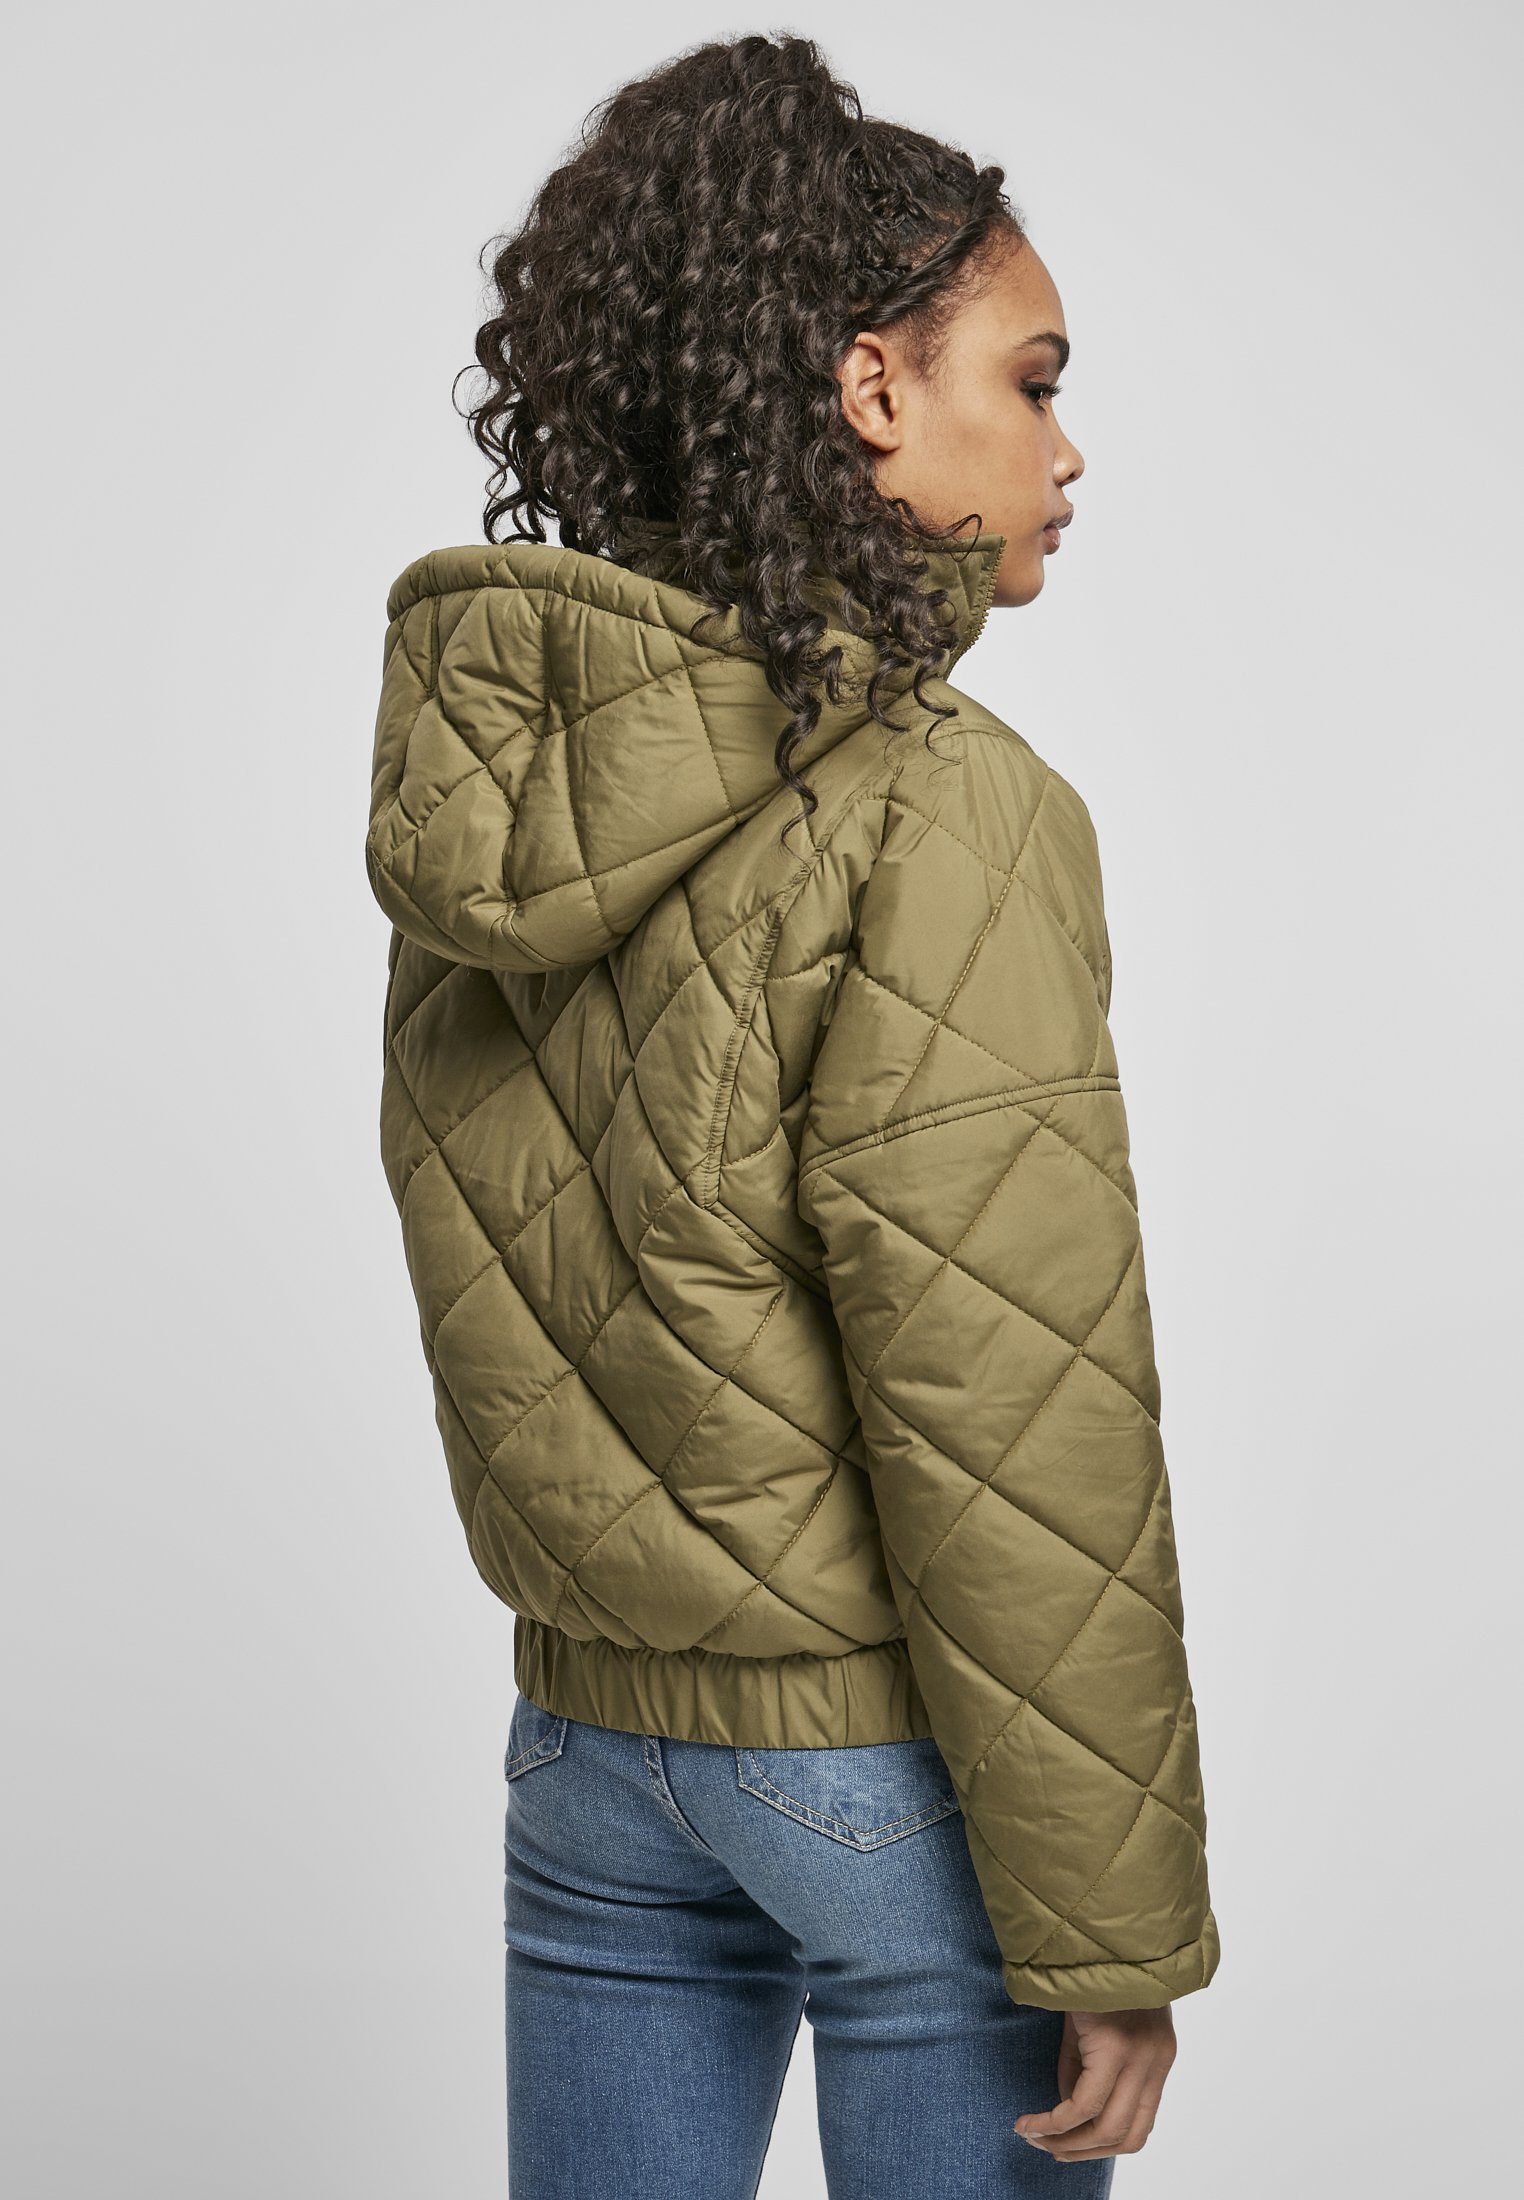 Oversized tiniolive Over CLASSICS Ladies Pull Diamond Damen Winterjacke Jacket (1-St) URBAN Quilted